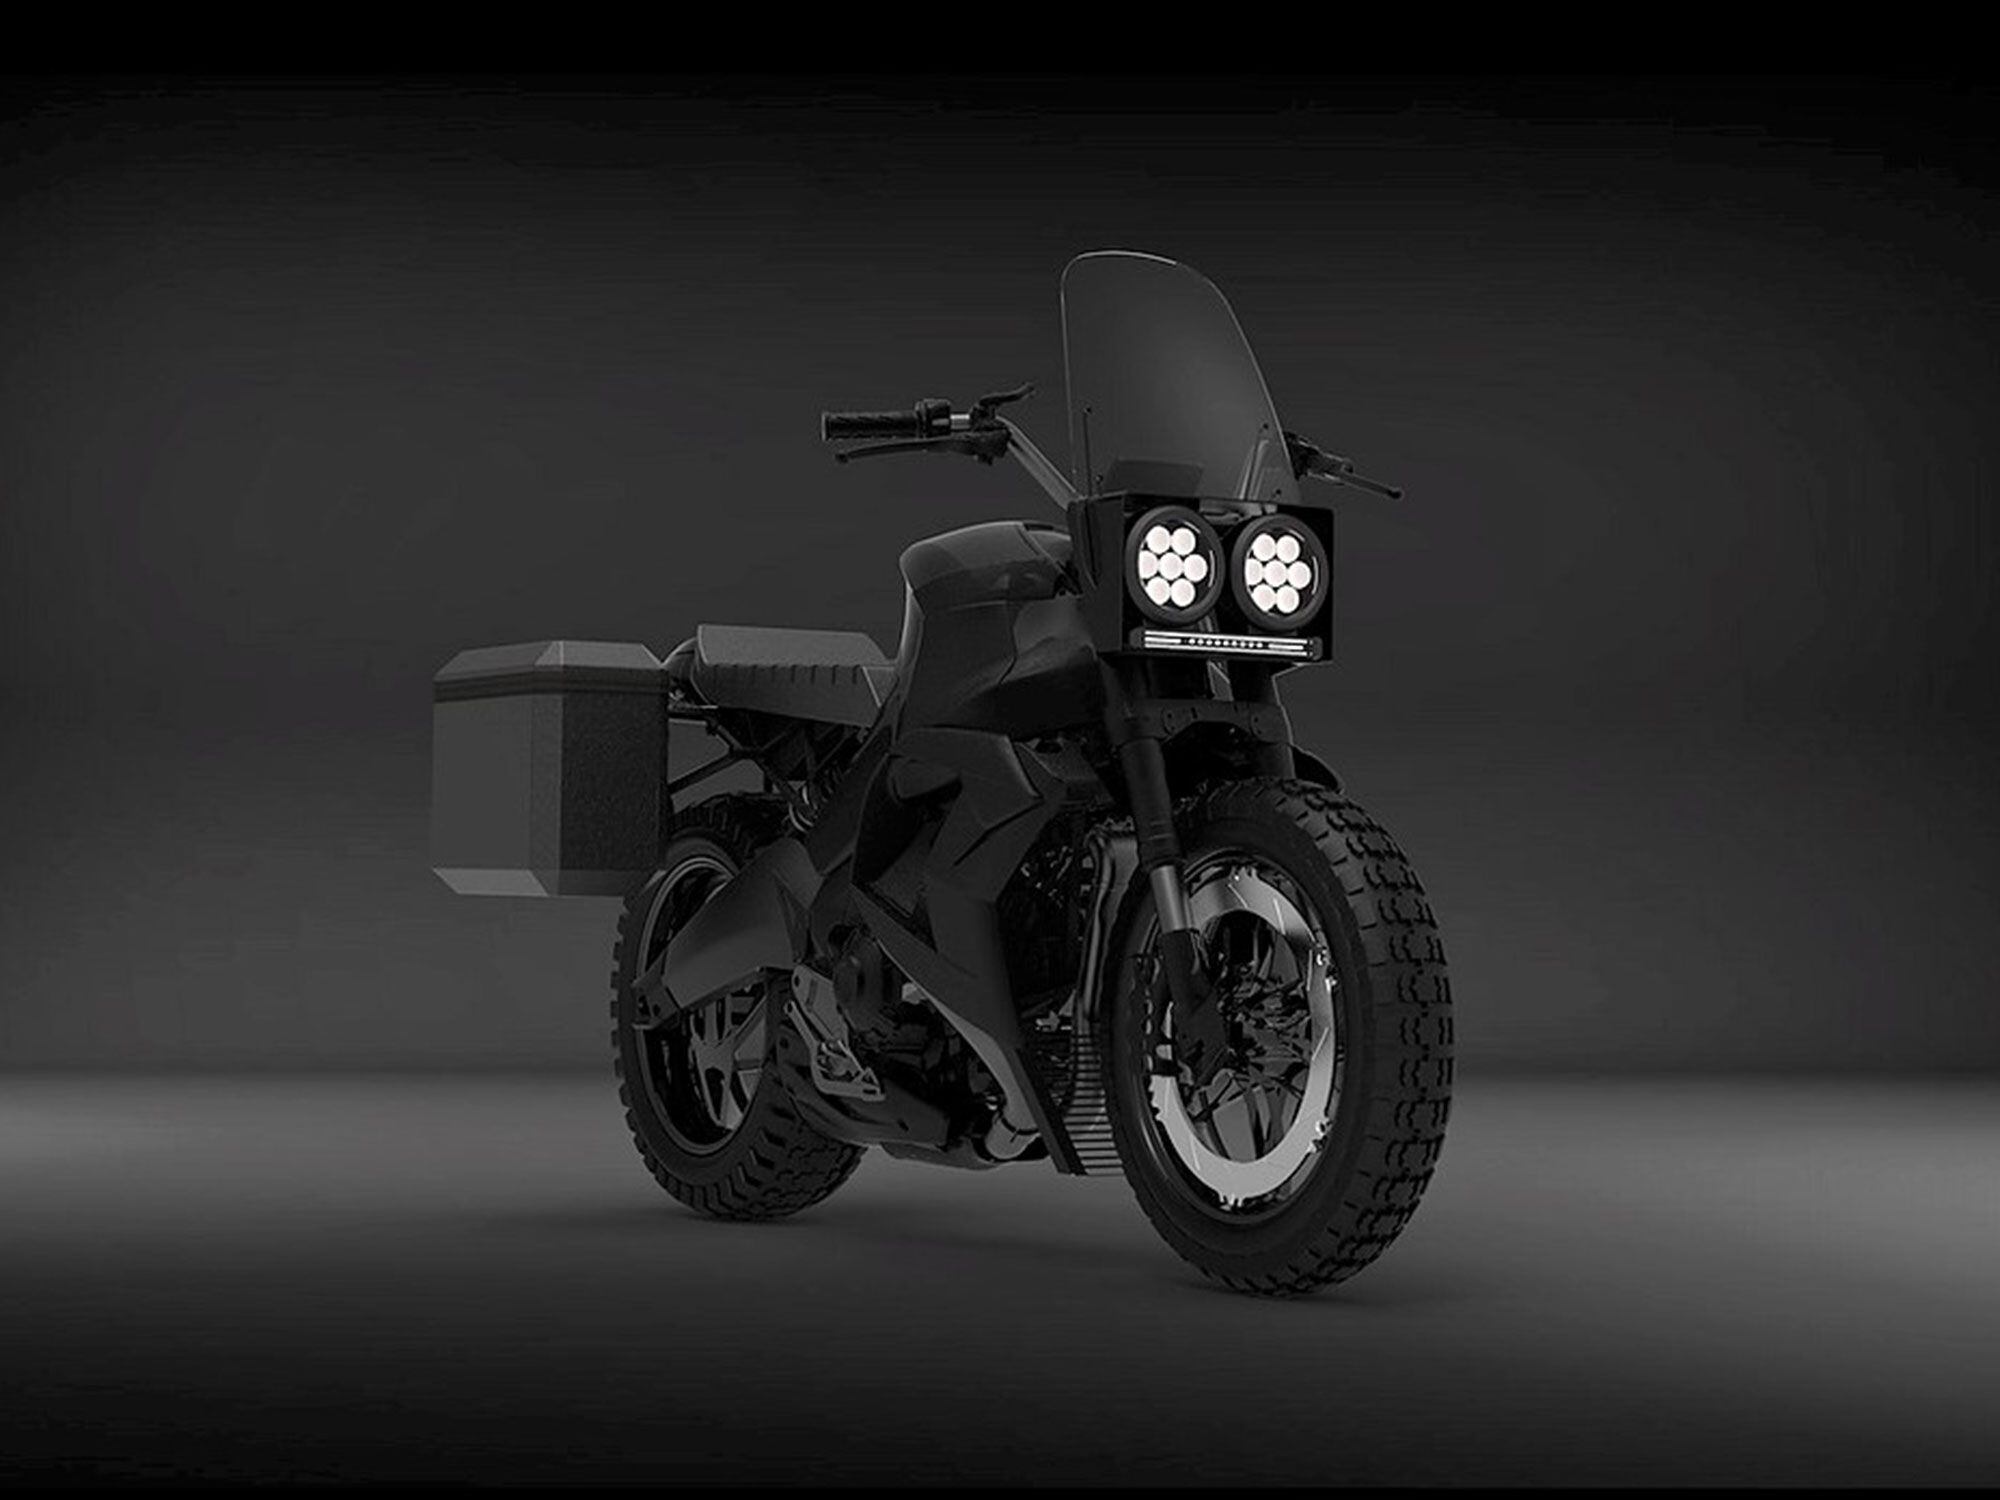 The reborn brand also says it plans on releasing an 185 hp adventure model based on the 1190SX.